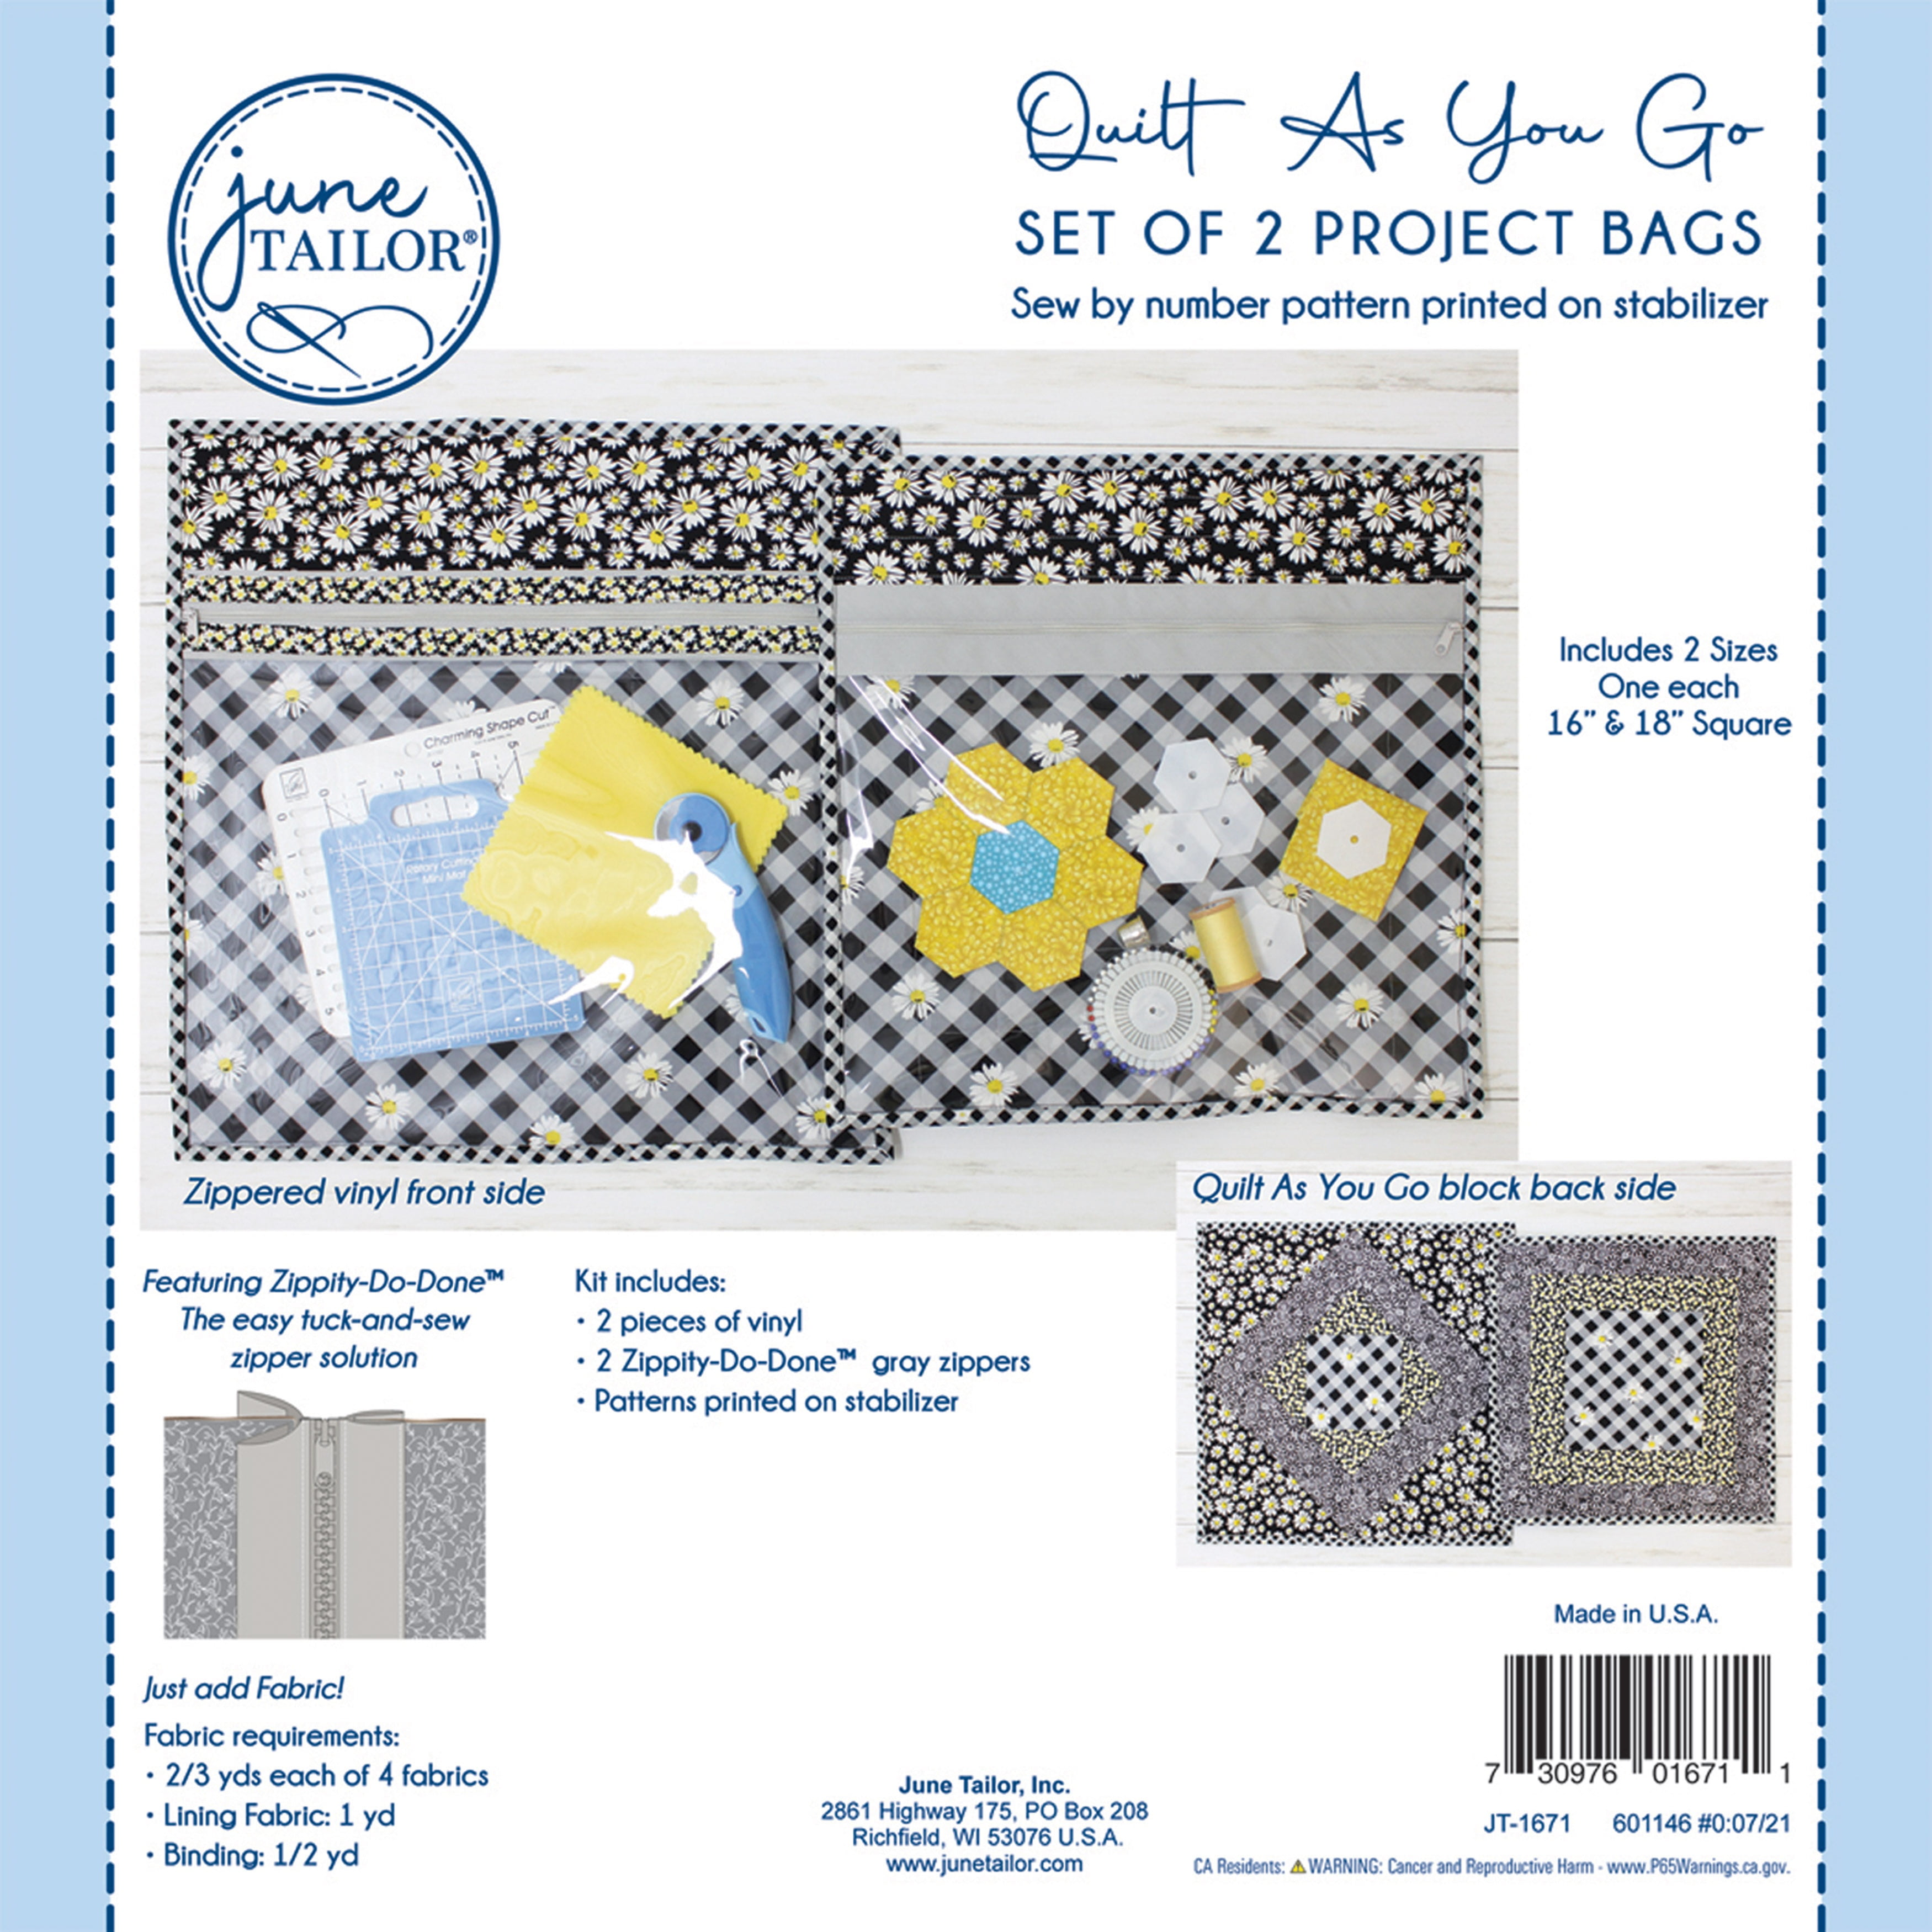 June Tailor Quilt As You Go Project Bag Kit-Gray Zippity-Do-Done